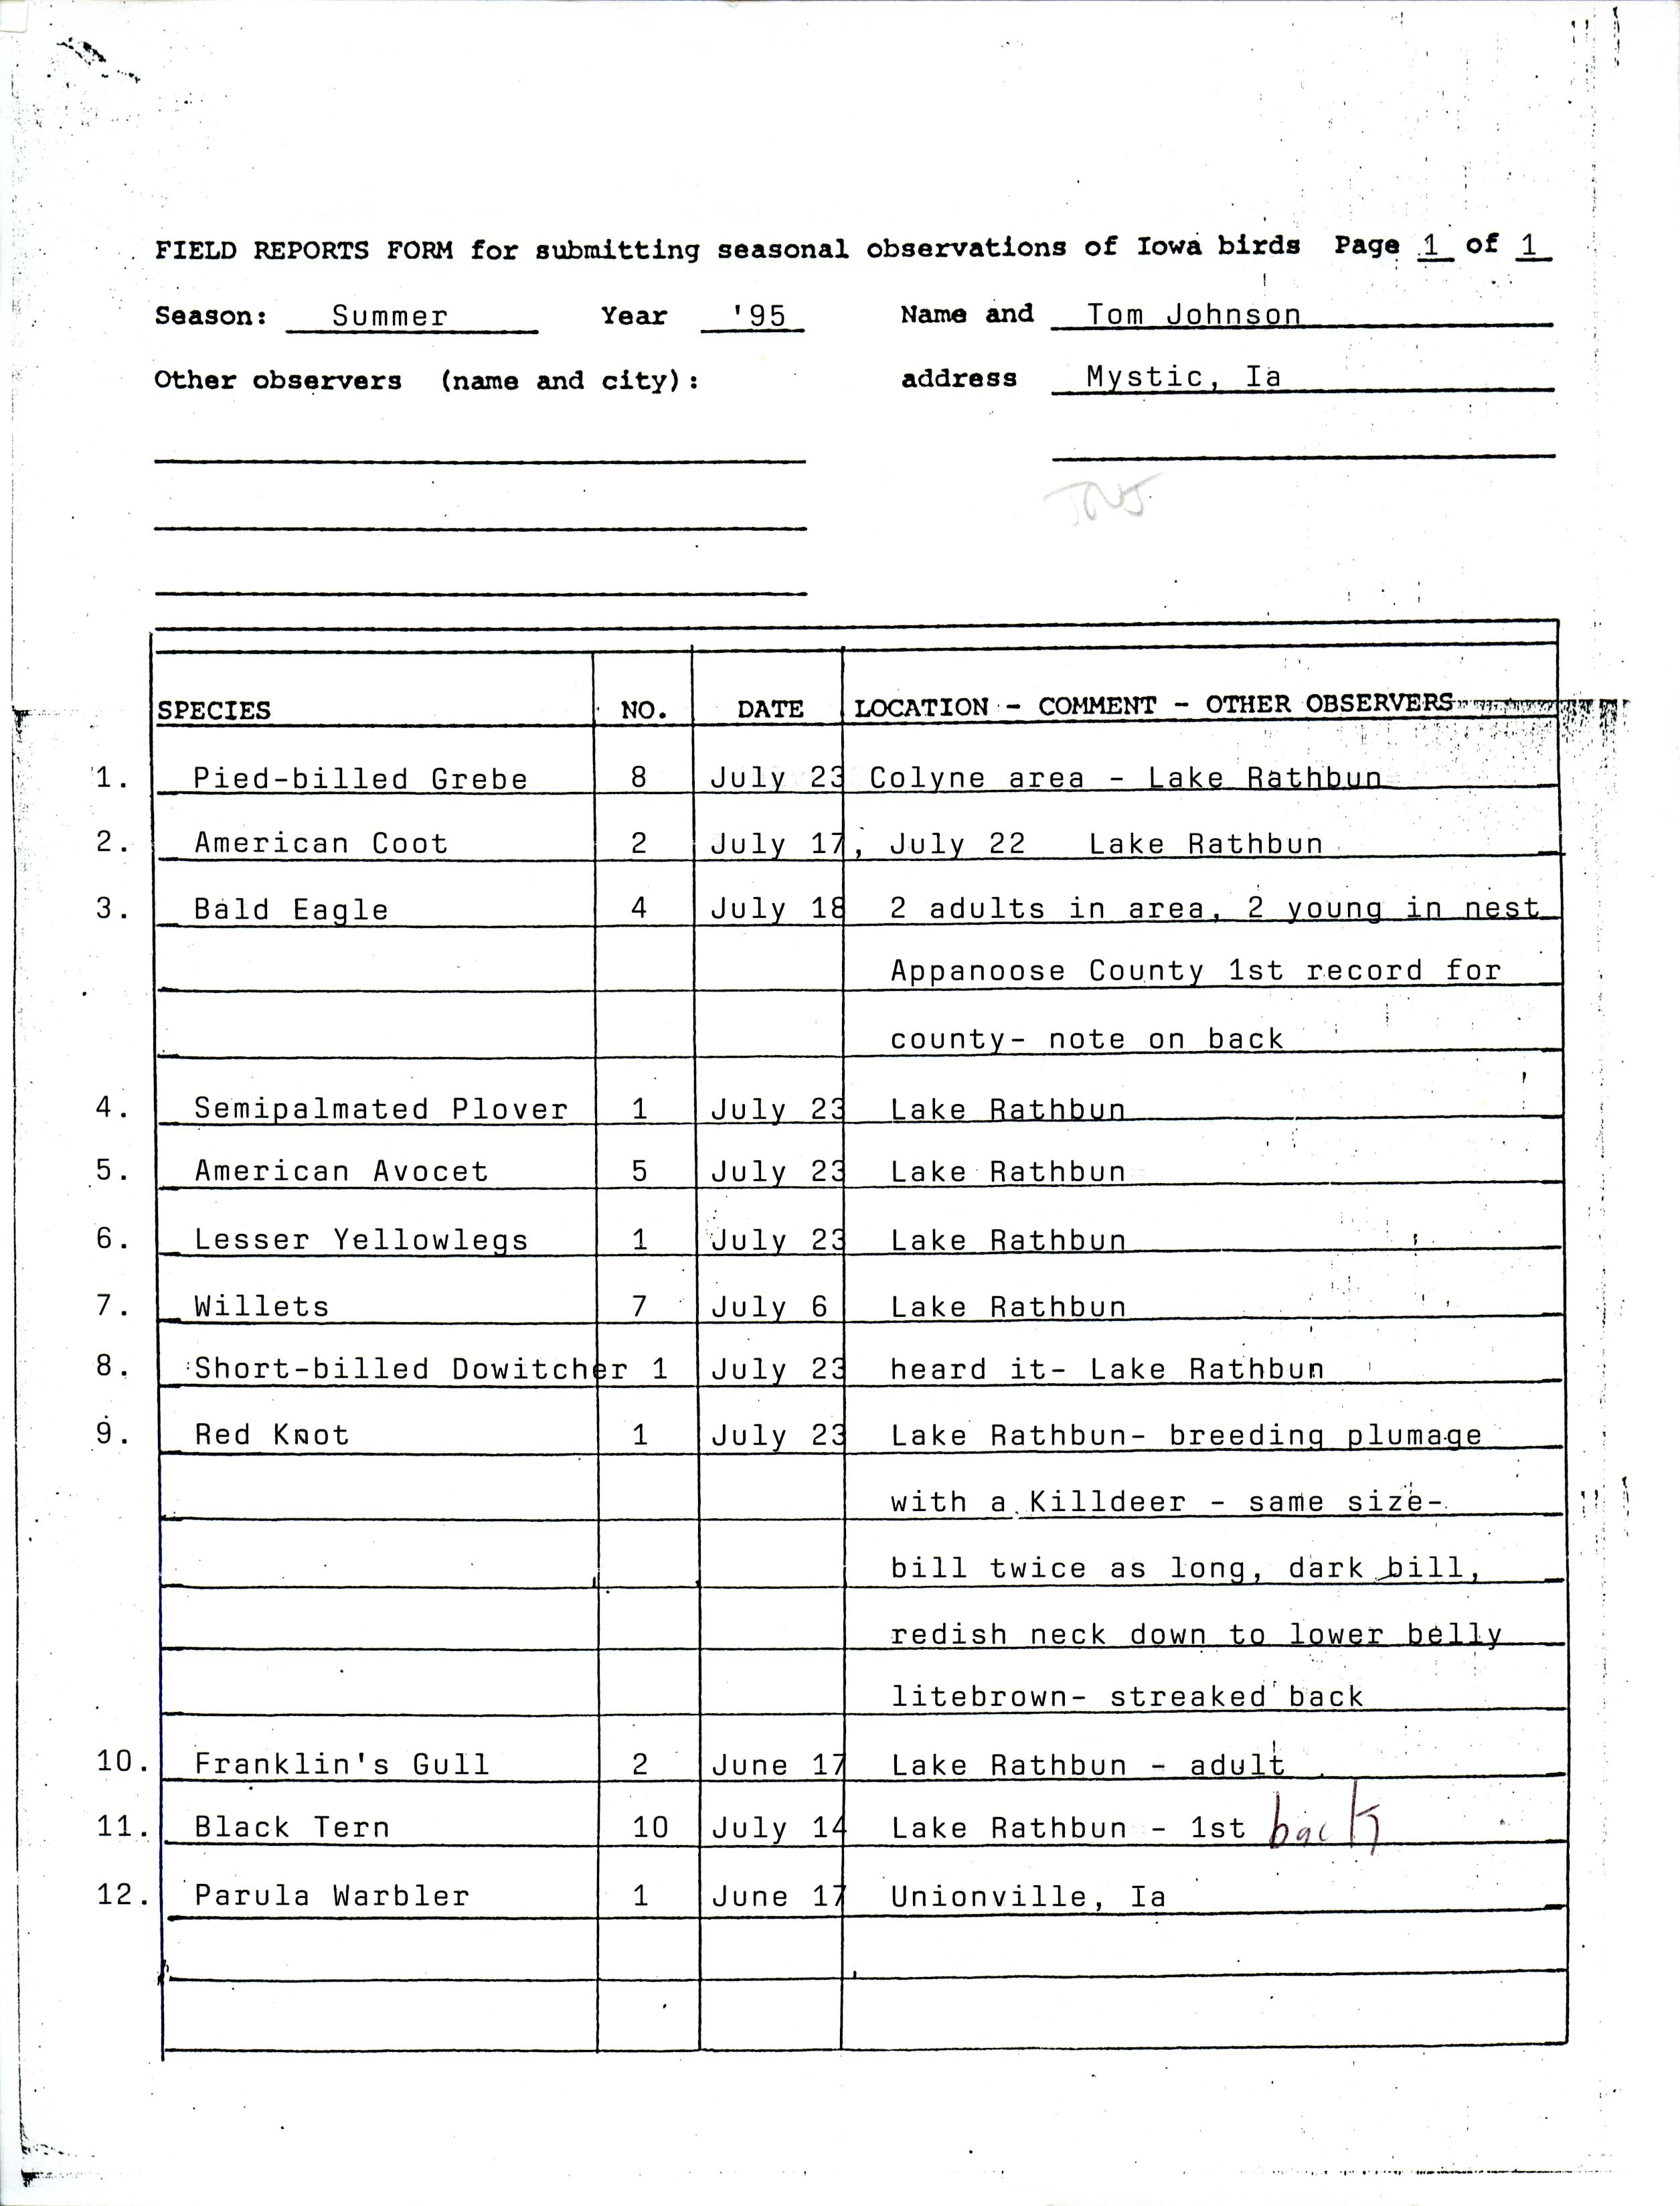 Field reports form for submitting seasonal observations of Iowa birds, summer 1995, Tom Johnson